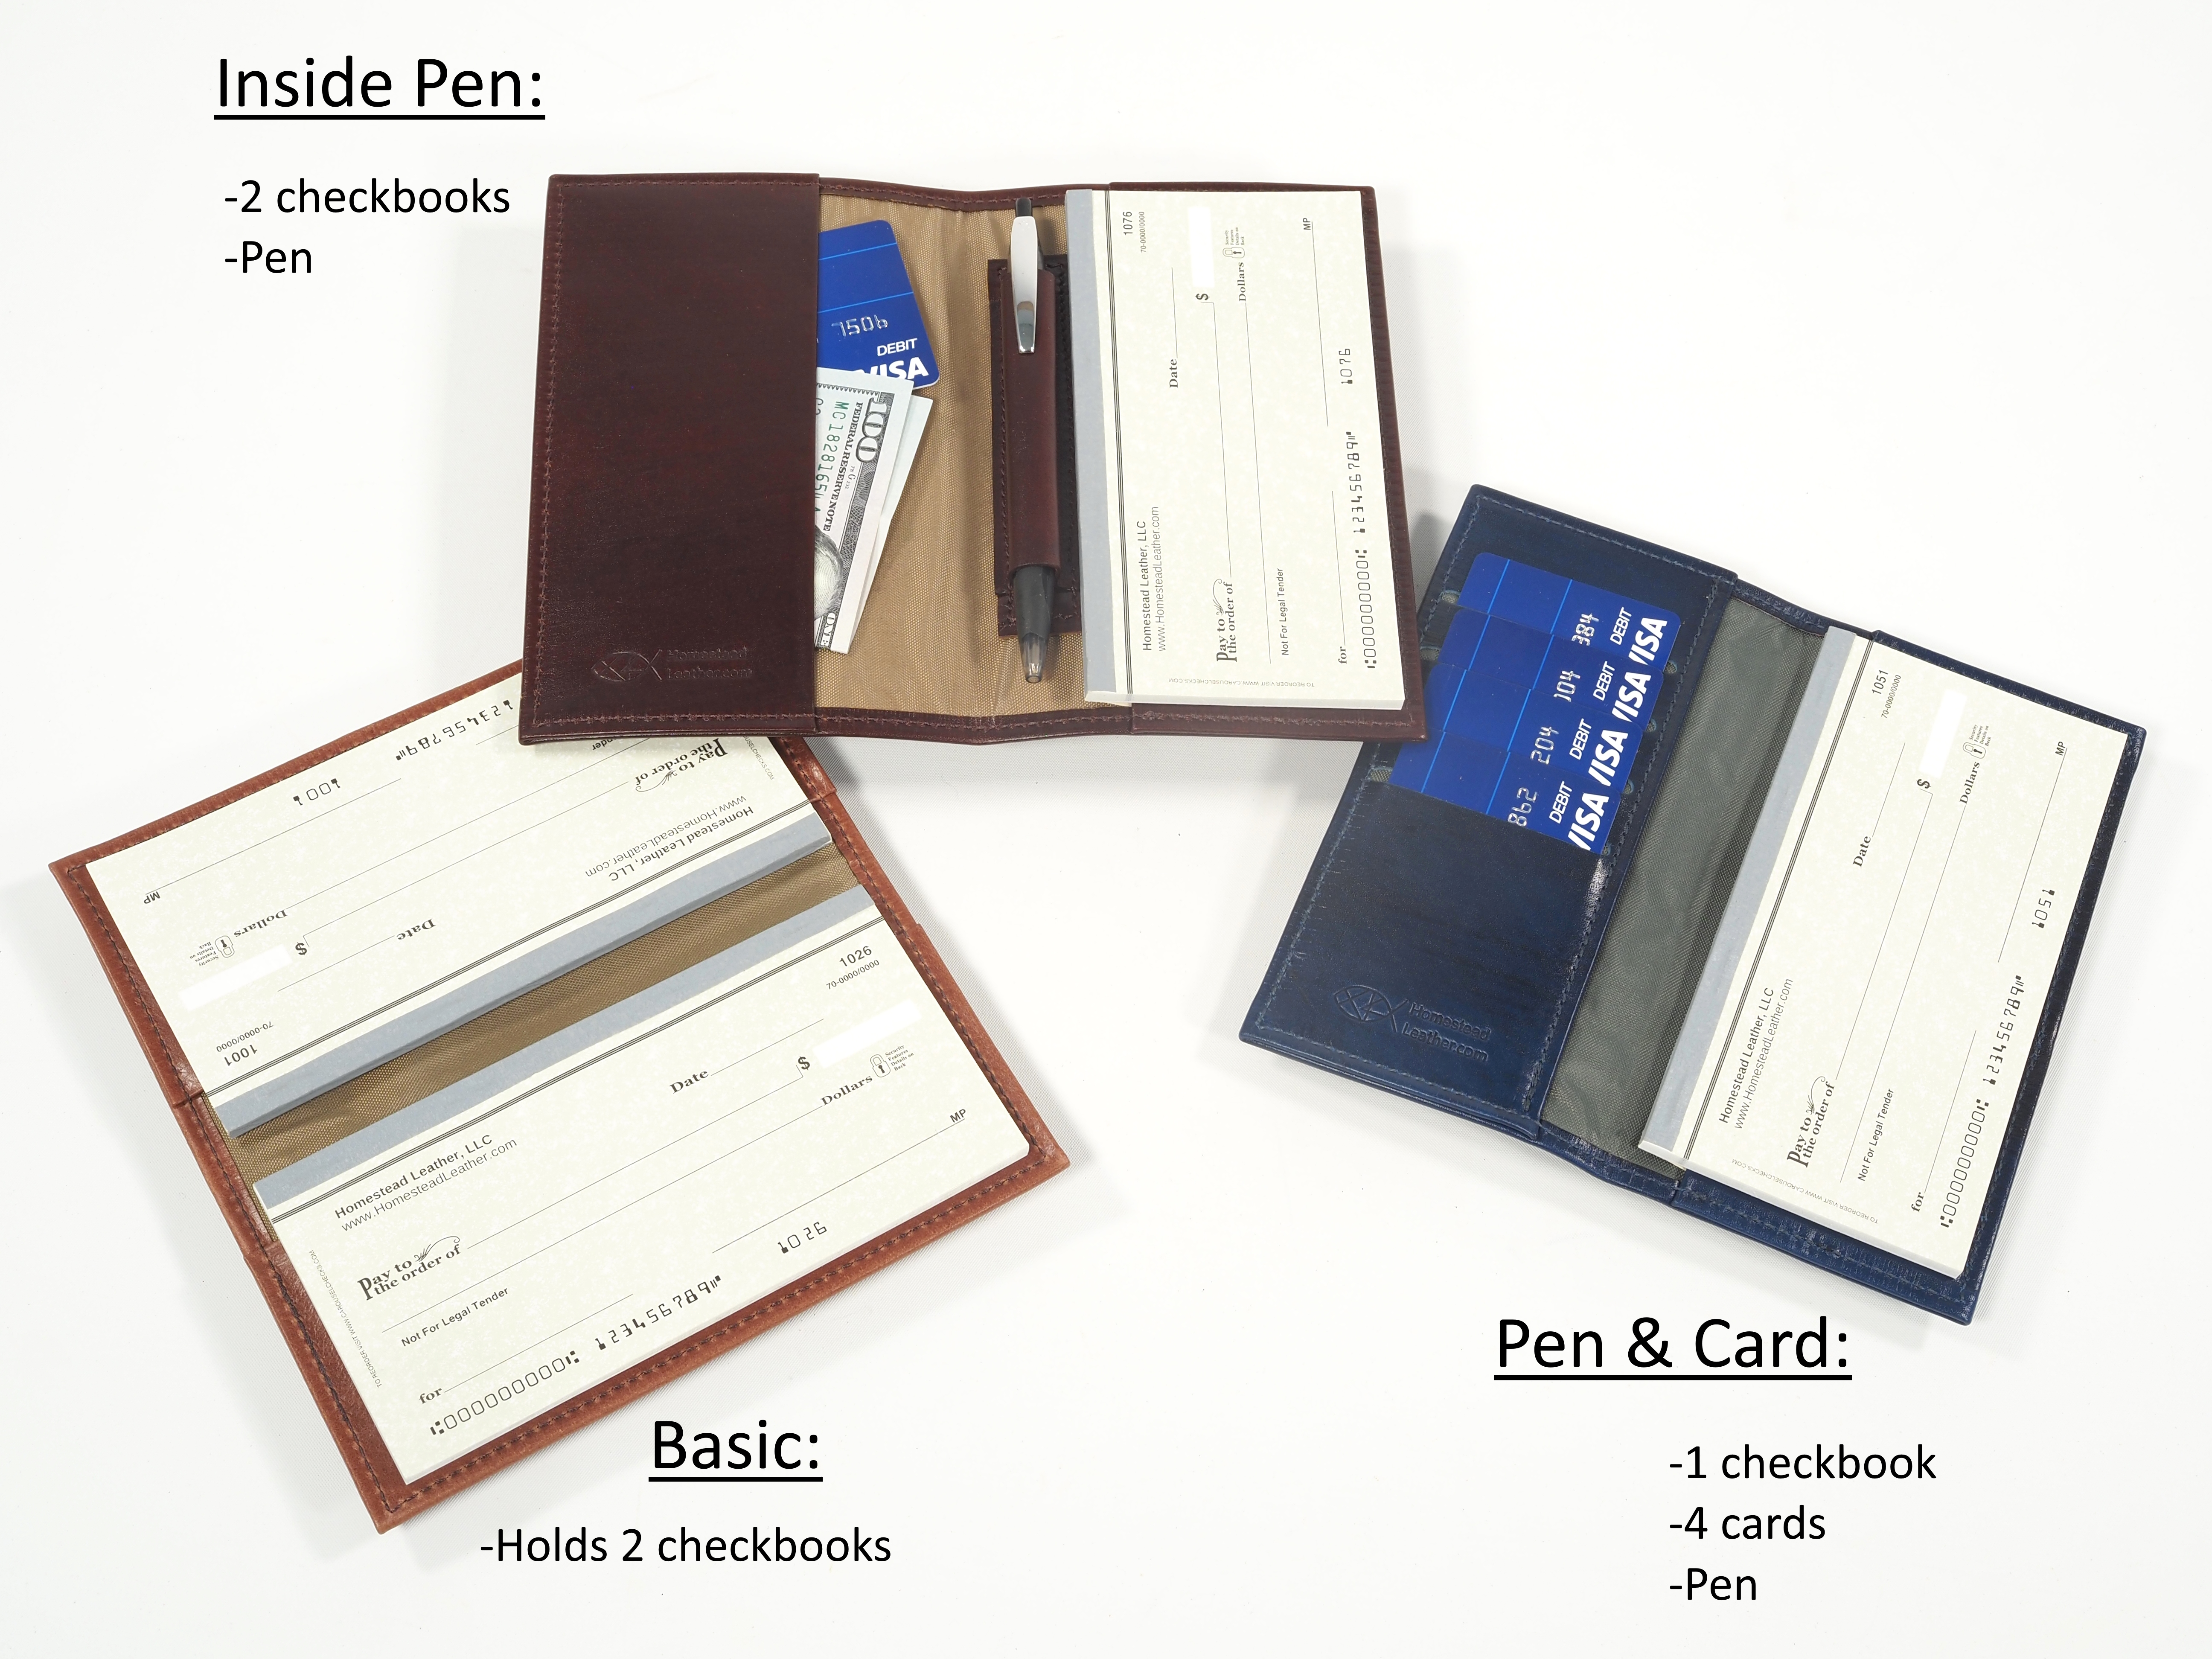 several checkbook covers with pen and cards